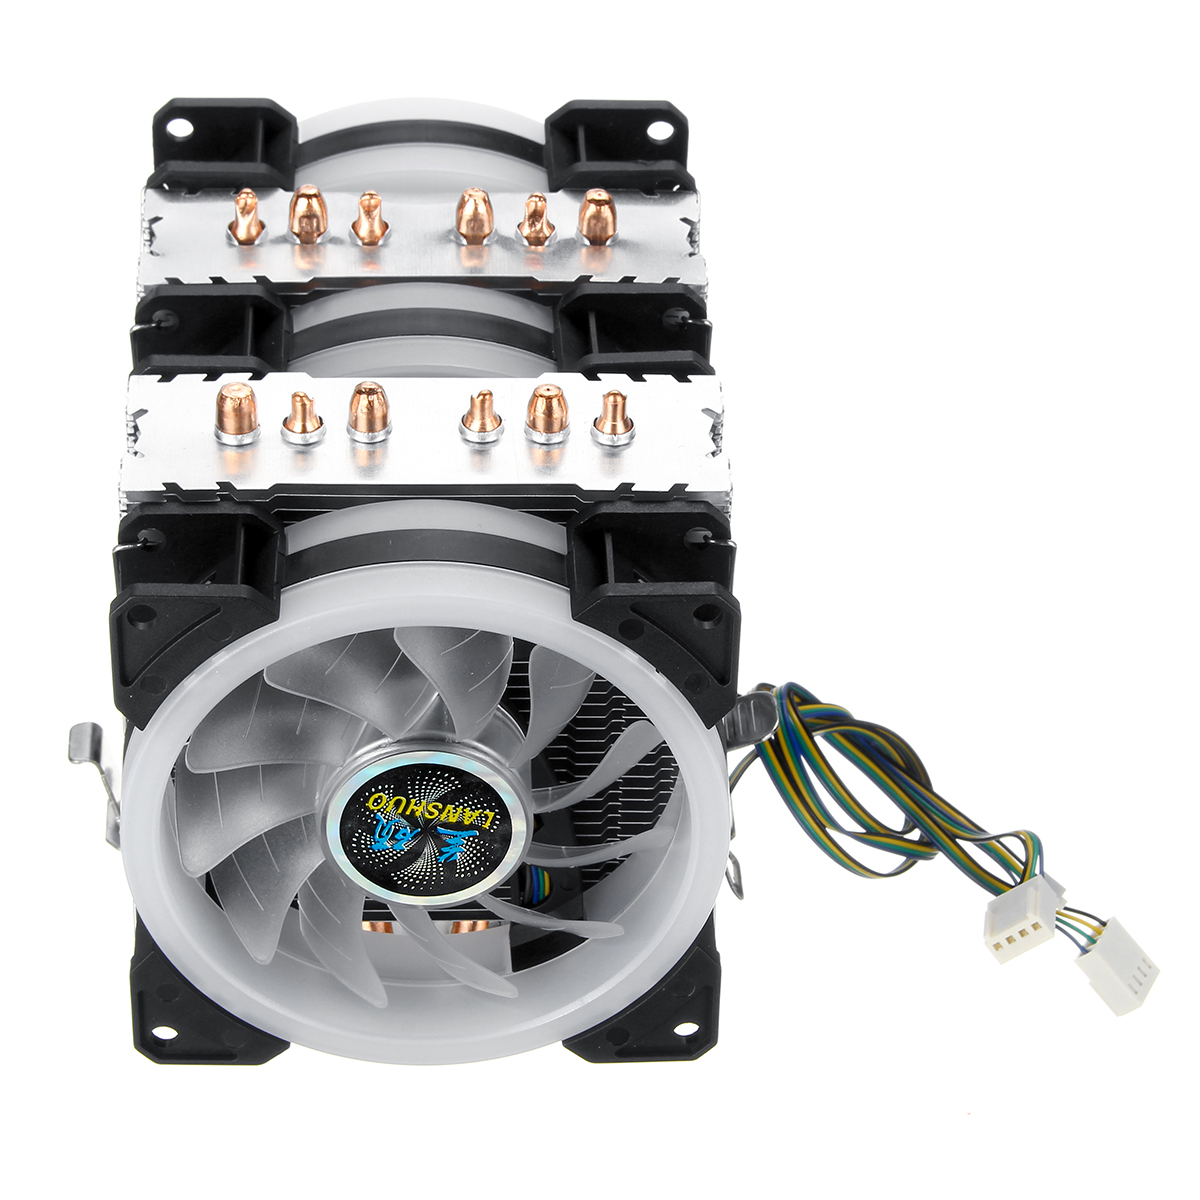 Find CPU Cooler 6 Heatpipe 4 Pin RGB Cooling Fan For Intel 775/1150/1151/1155/1156/1366 AMD for Sale on Gipsybee.com with cryptocurrencies